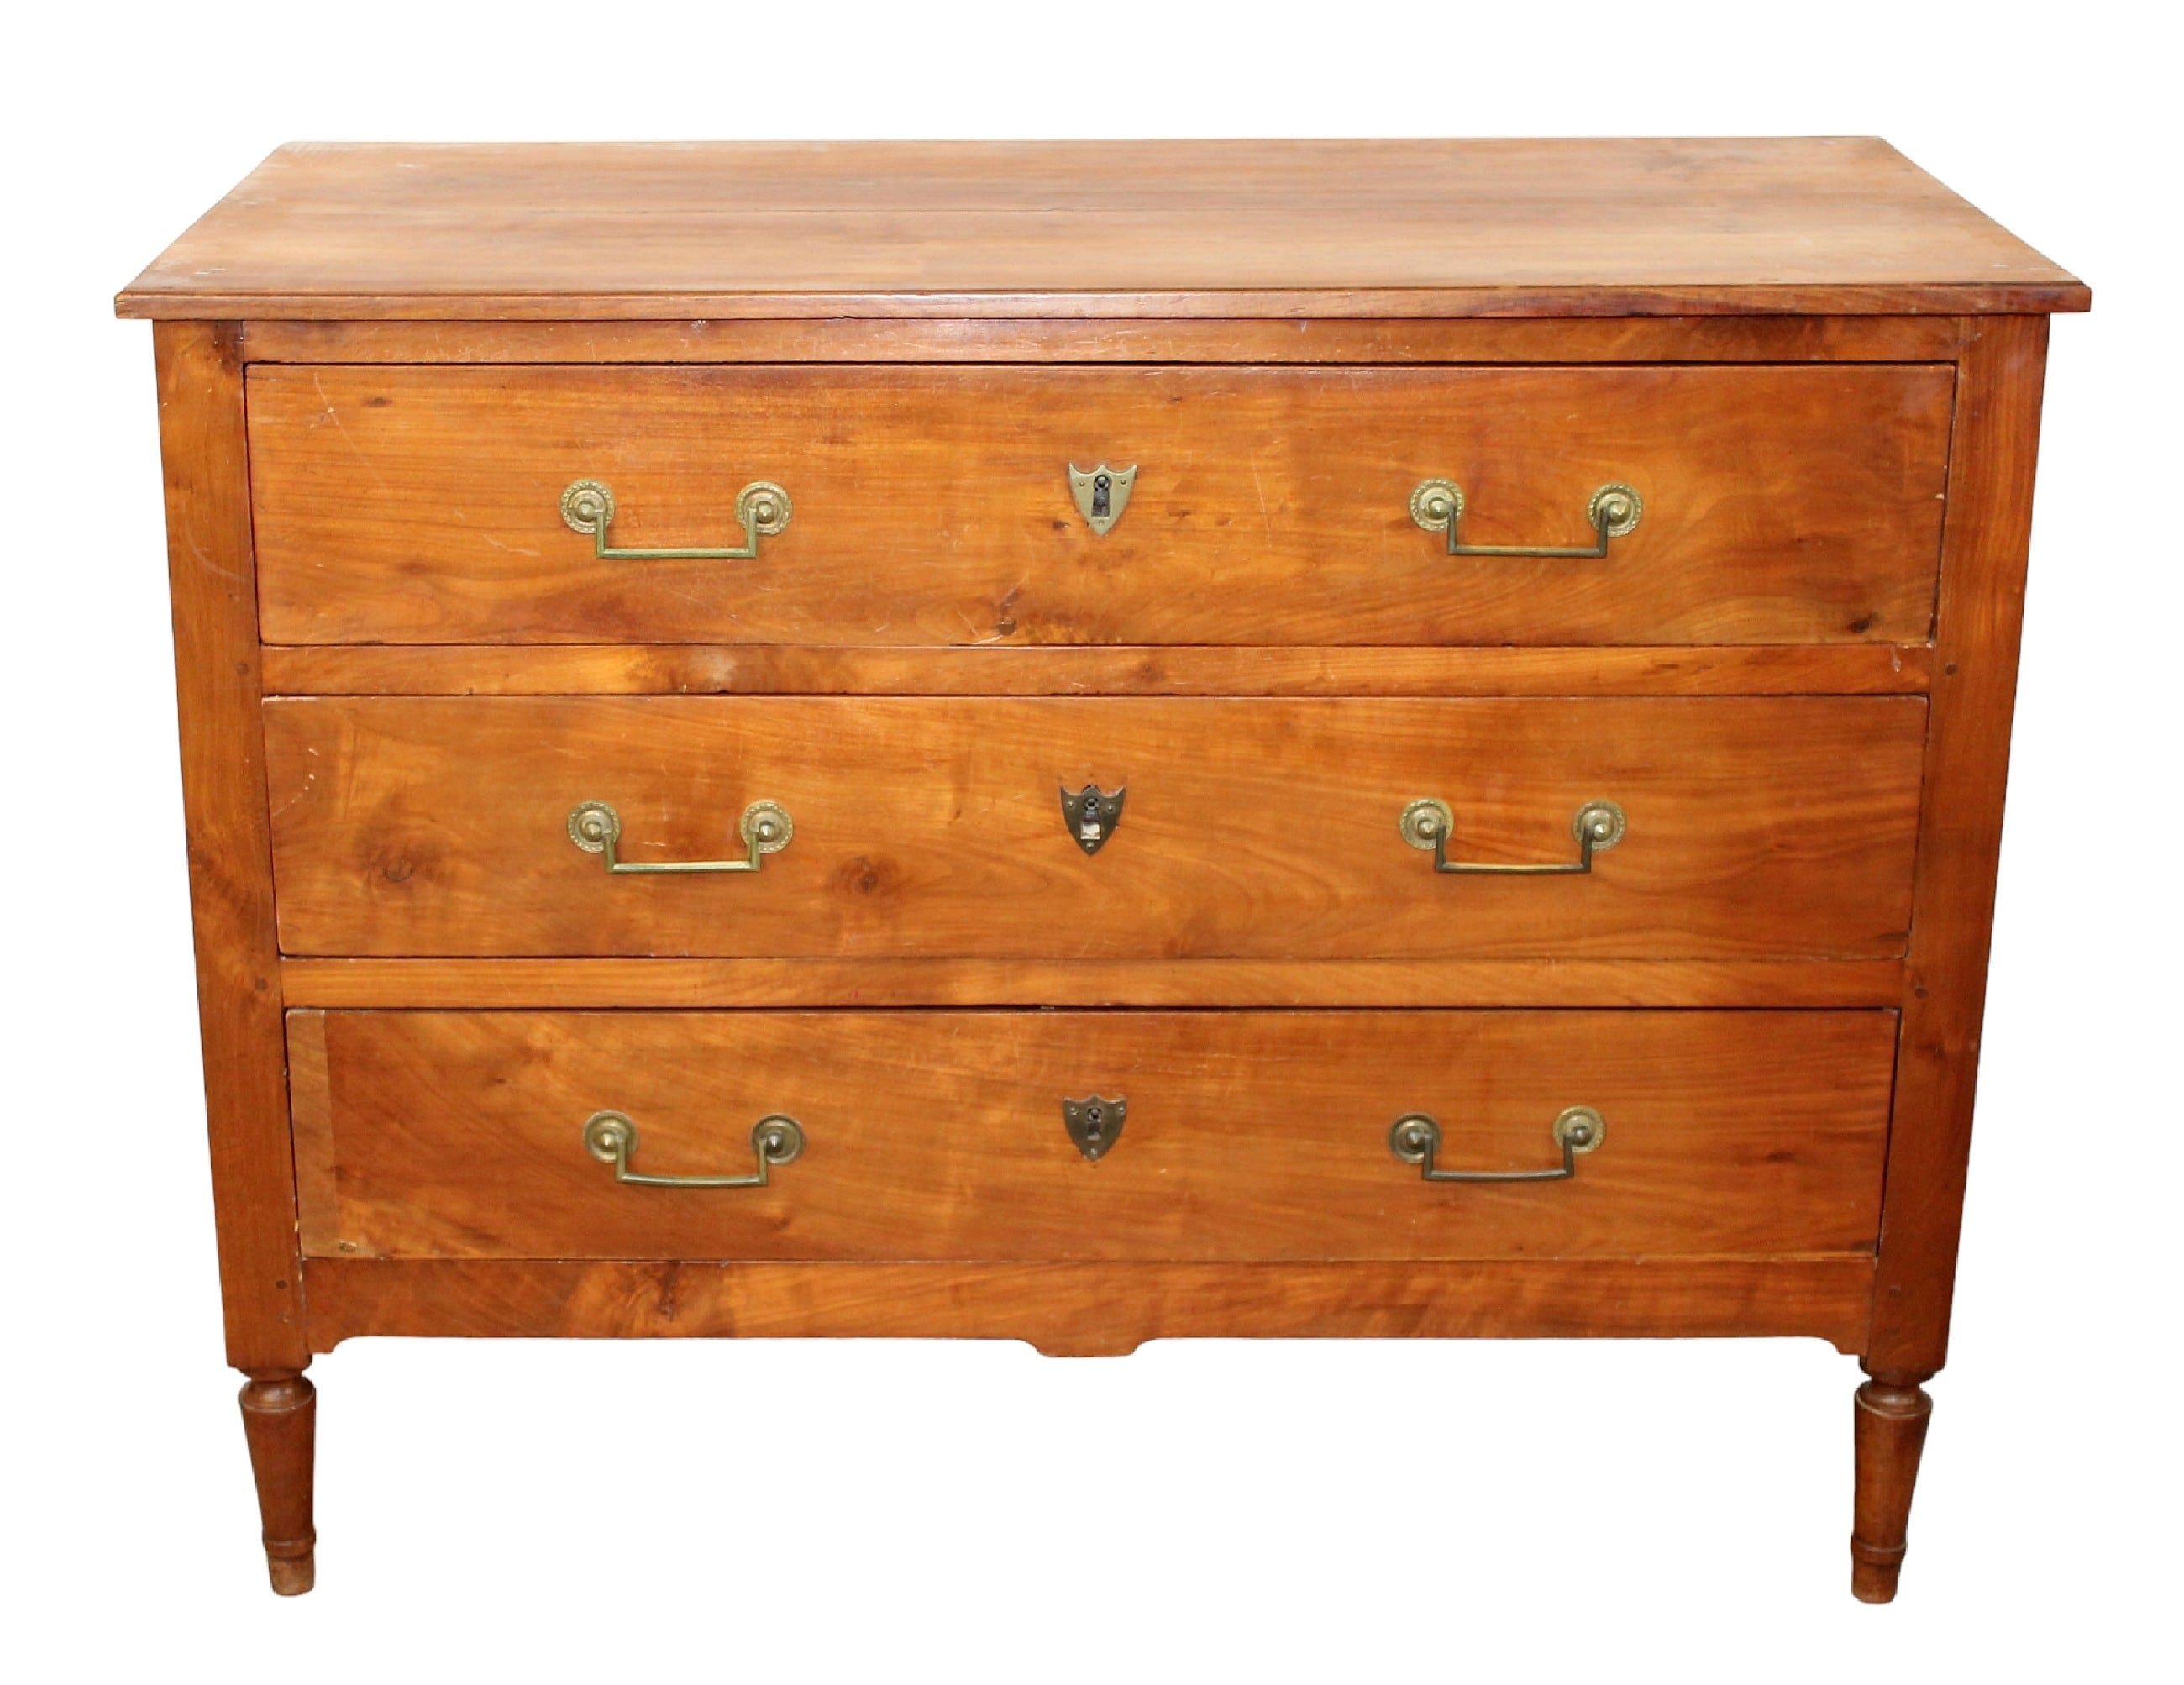 French Directoire style 3 drawer commode in cherry
